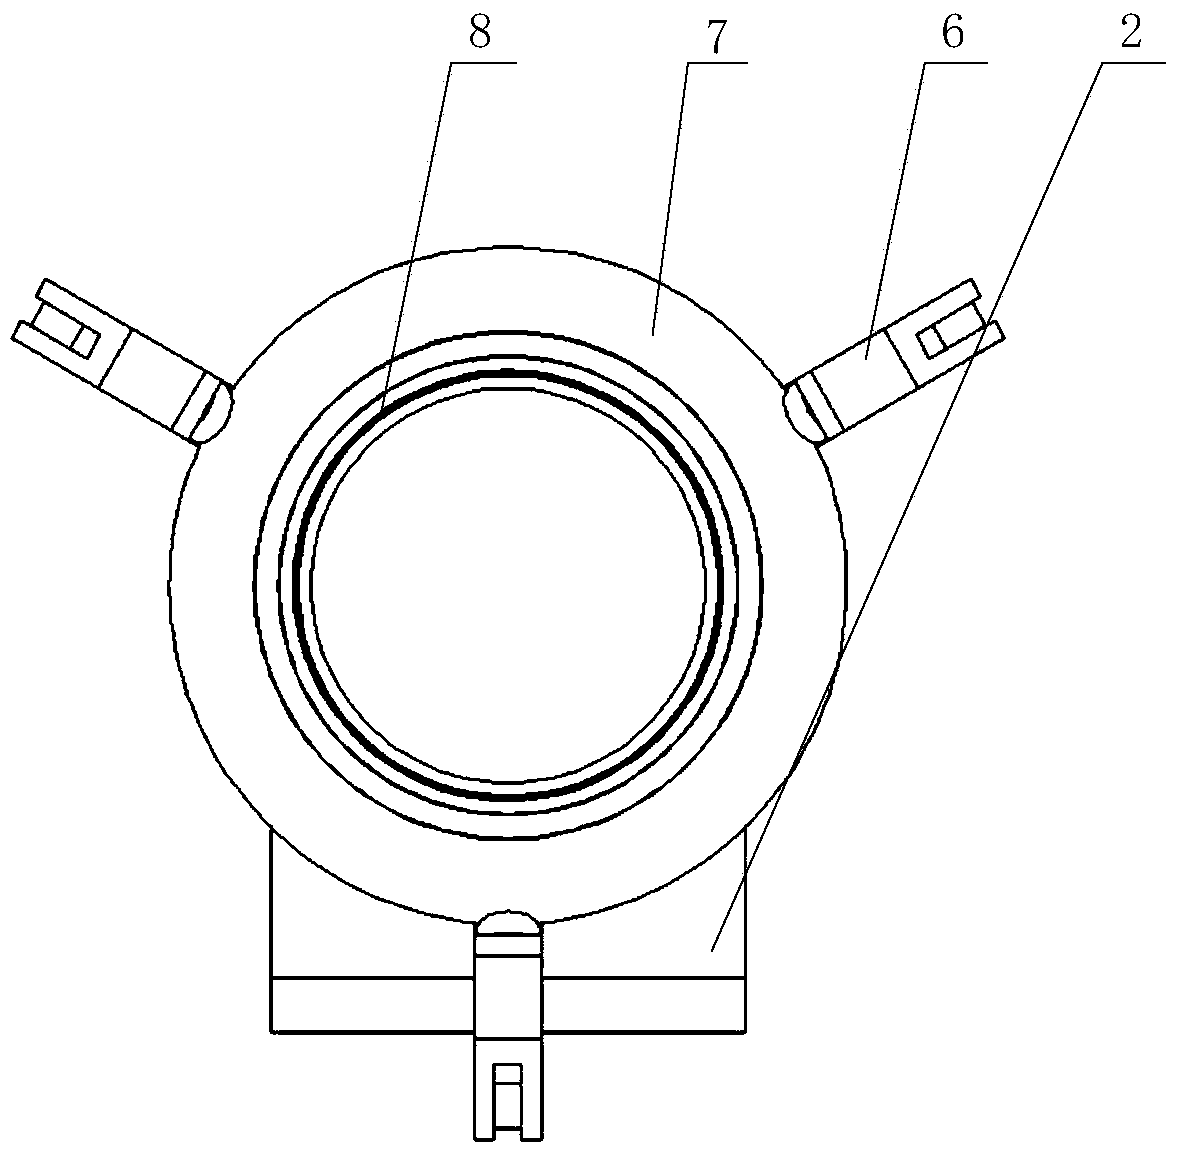 A trapezoidal flange three-claw clamping structure for a vehicle purifier